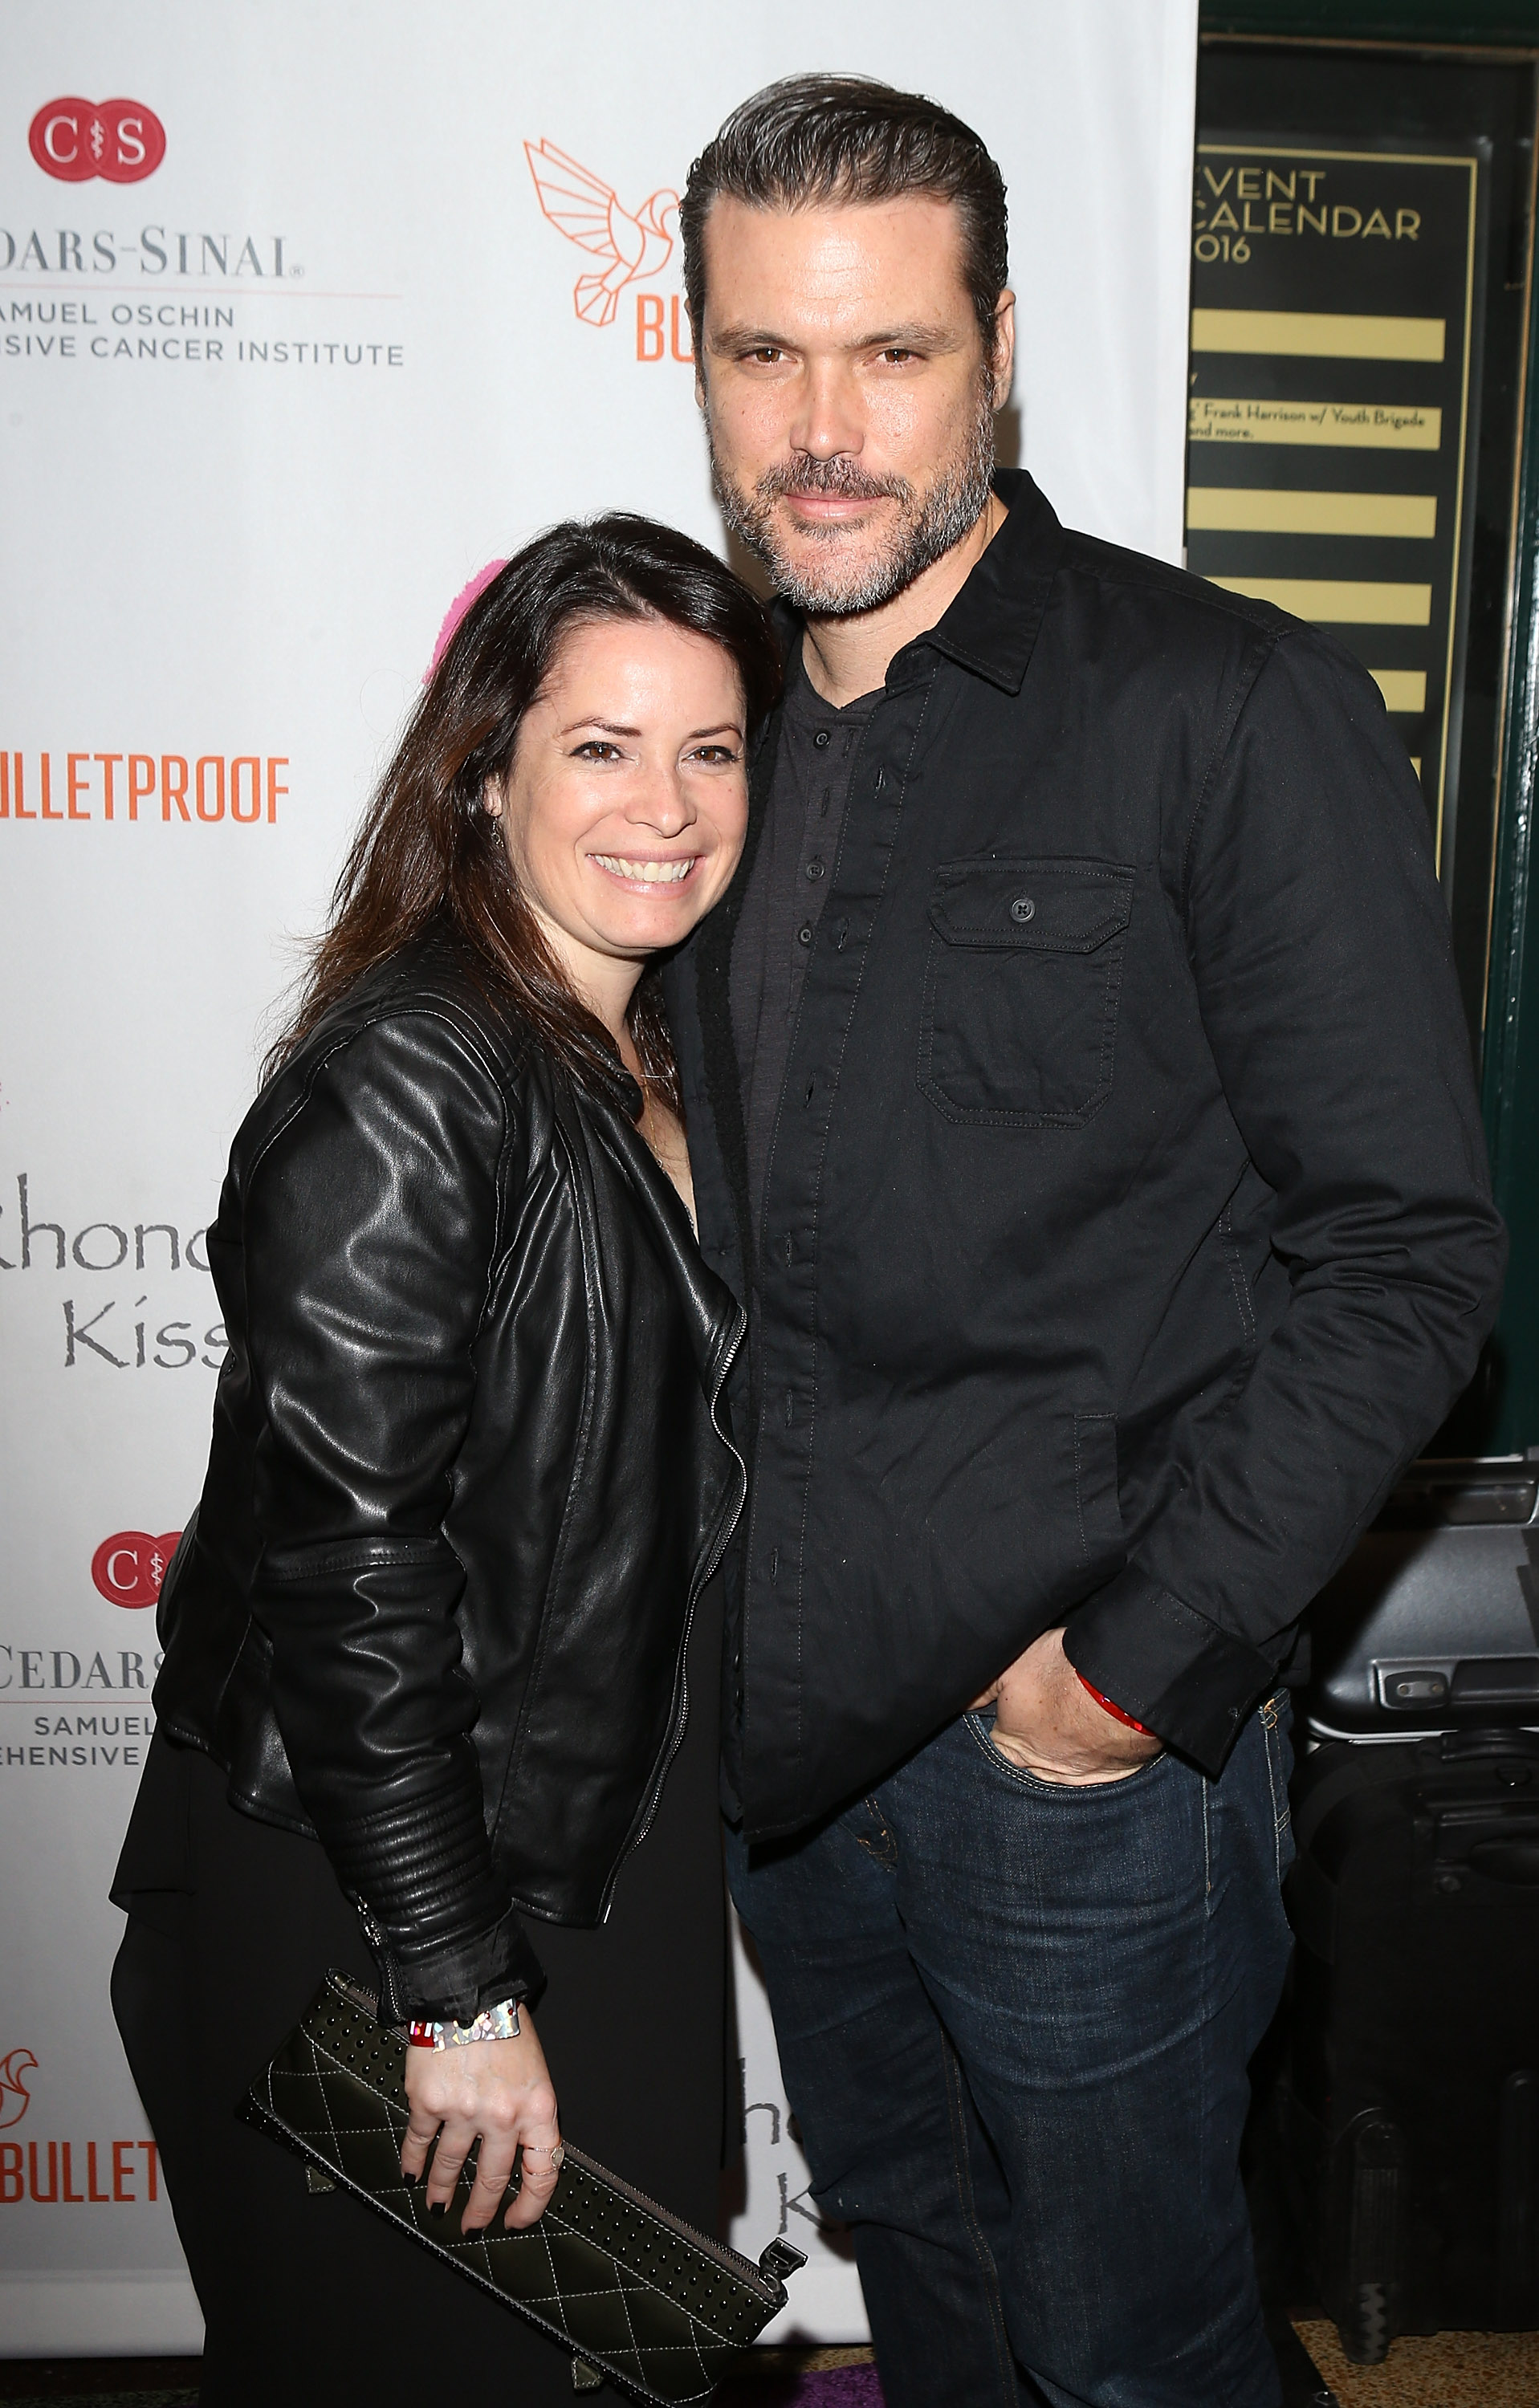 Holly Marie Combs and David Donoho at the 2016 Rhonda's Kiss event in Los Angeles, California, on November 3, 2016 | Source: Getty Images